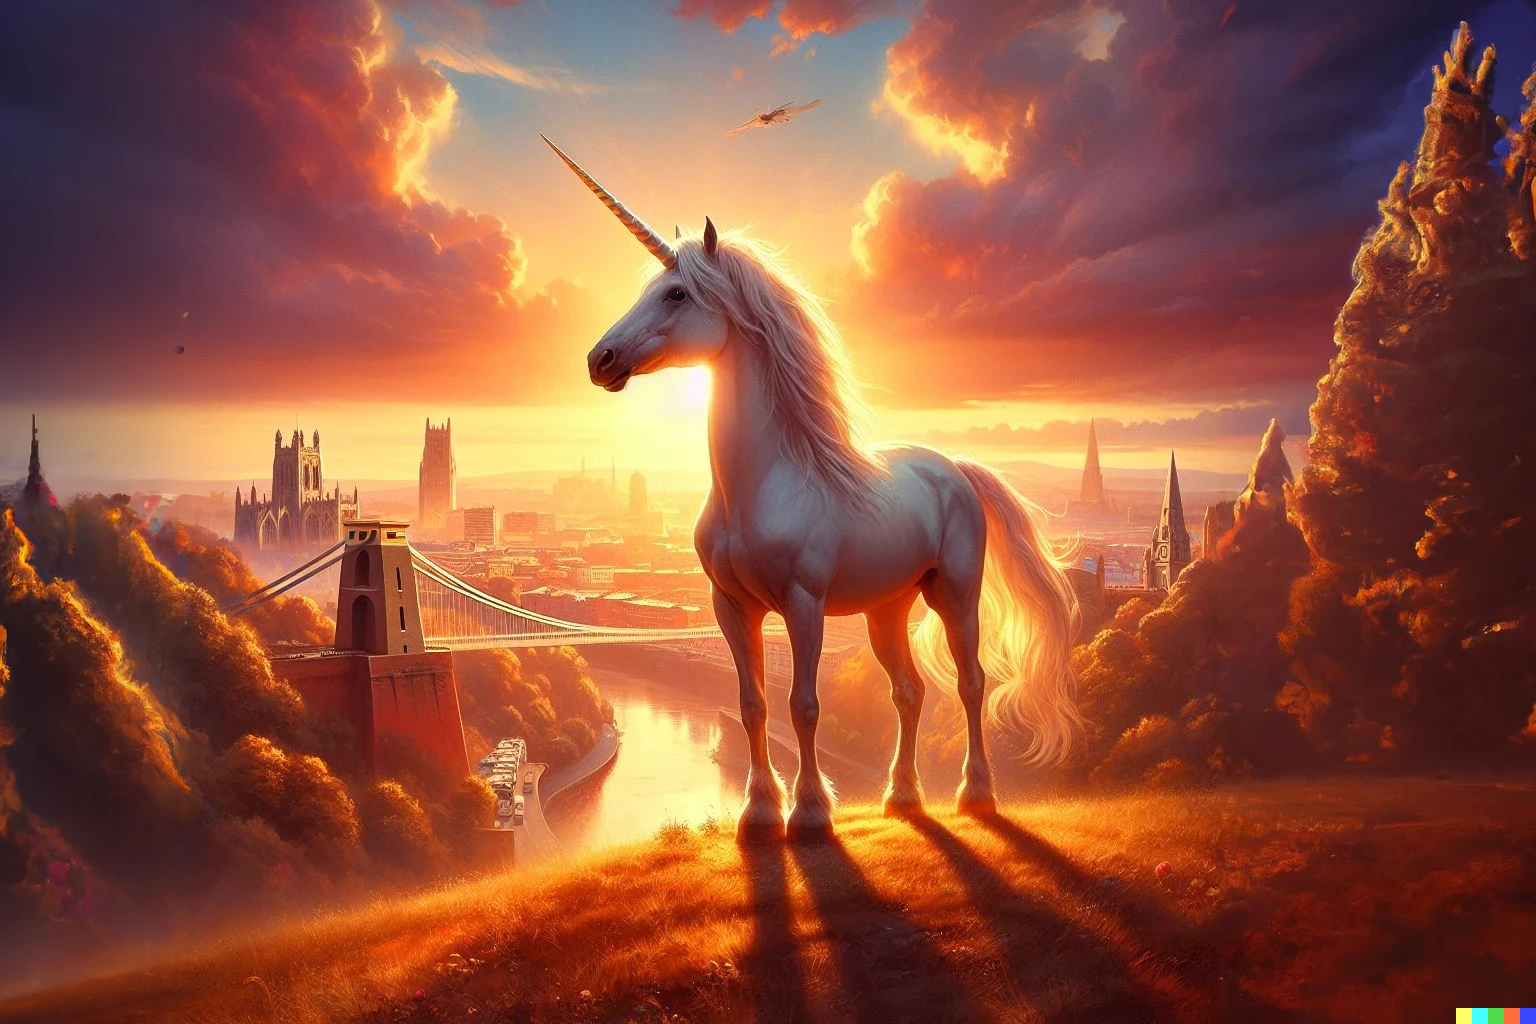 A more realistic unicorn stood on a hill with Bristol and the suspension bridge behind it at sunset. AI generated.